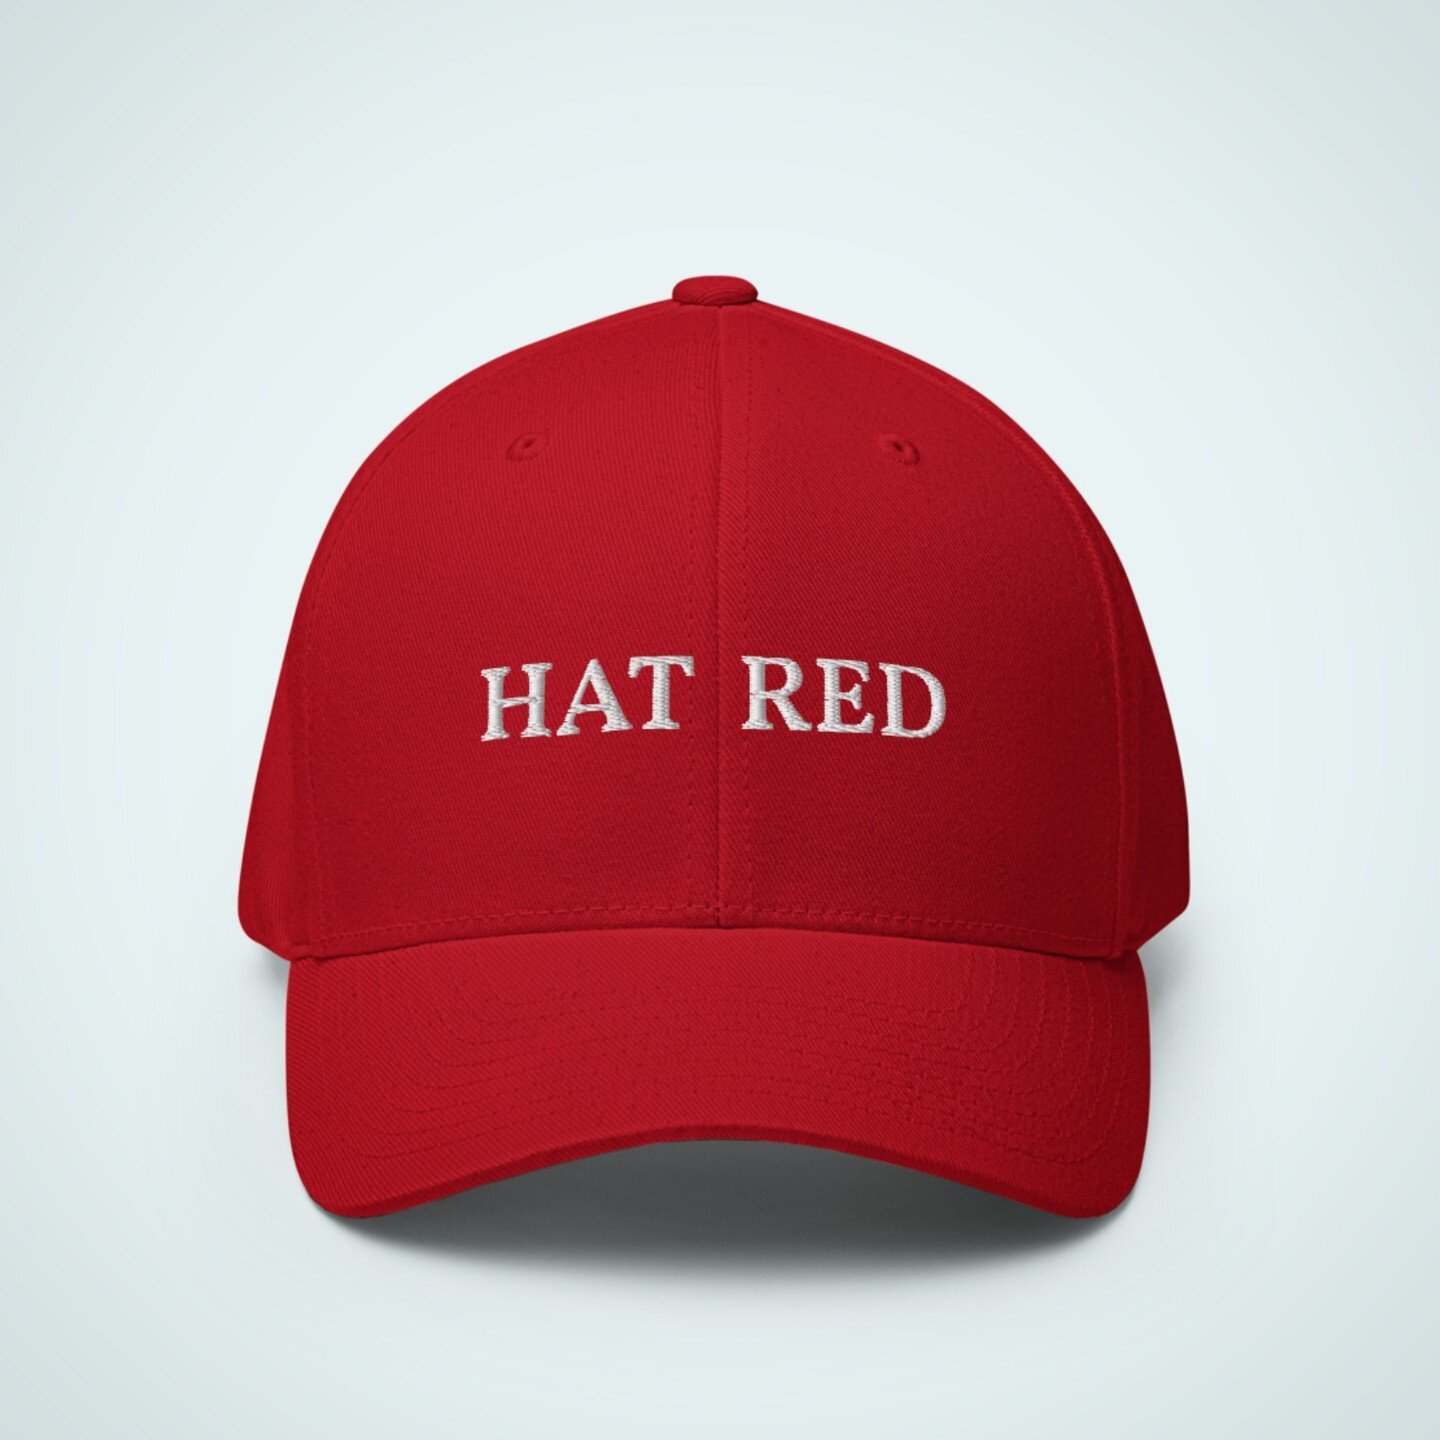 With the very real prospect of Donald Trump being the 2024 Republican Presidential nominee and the very real prospect that he may be elected President again, what better way to prepare than donning a red hat?

And what better red hat than one that te